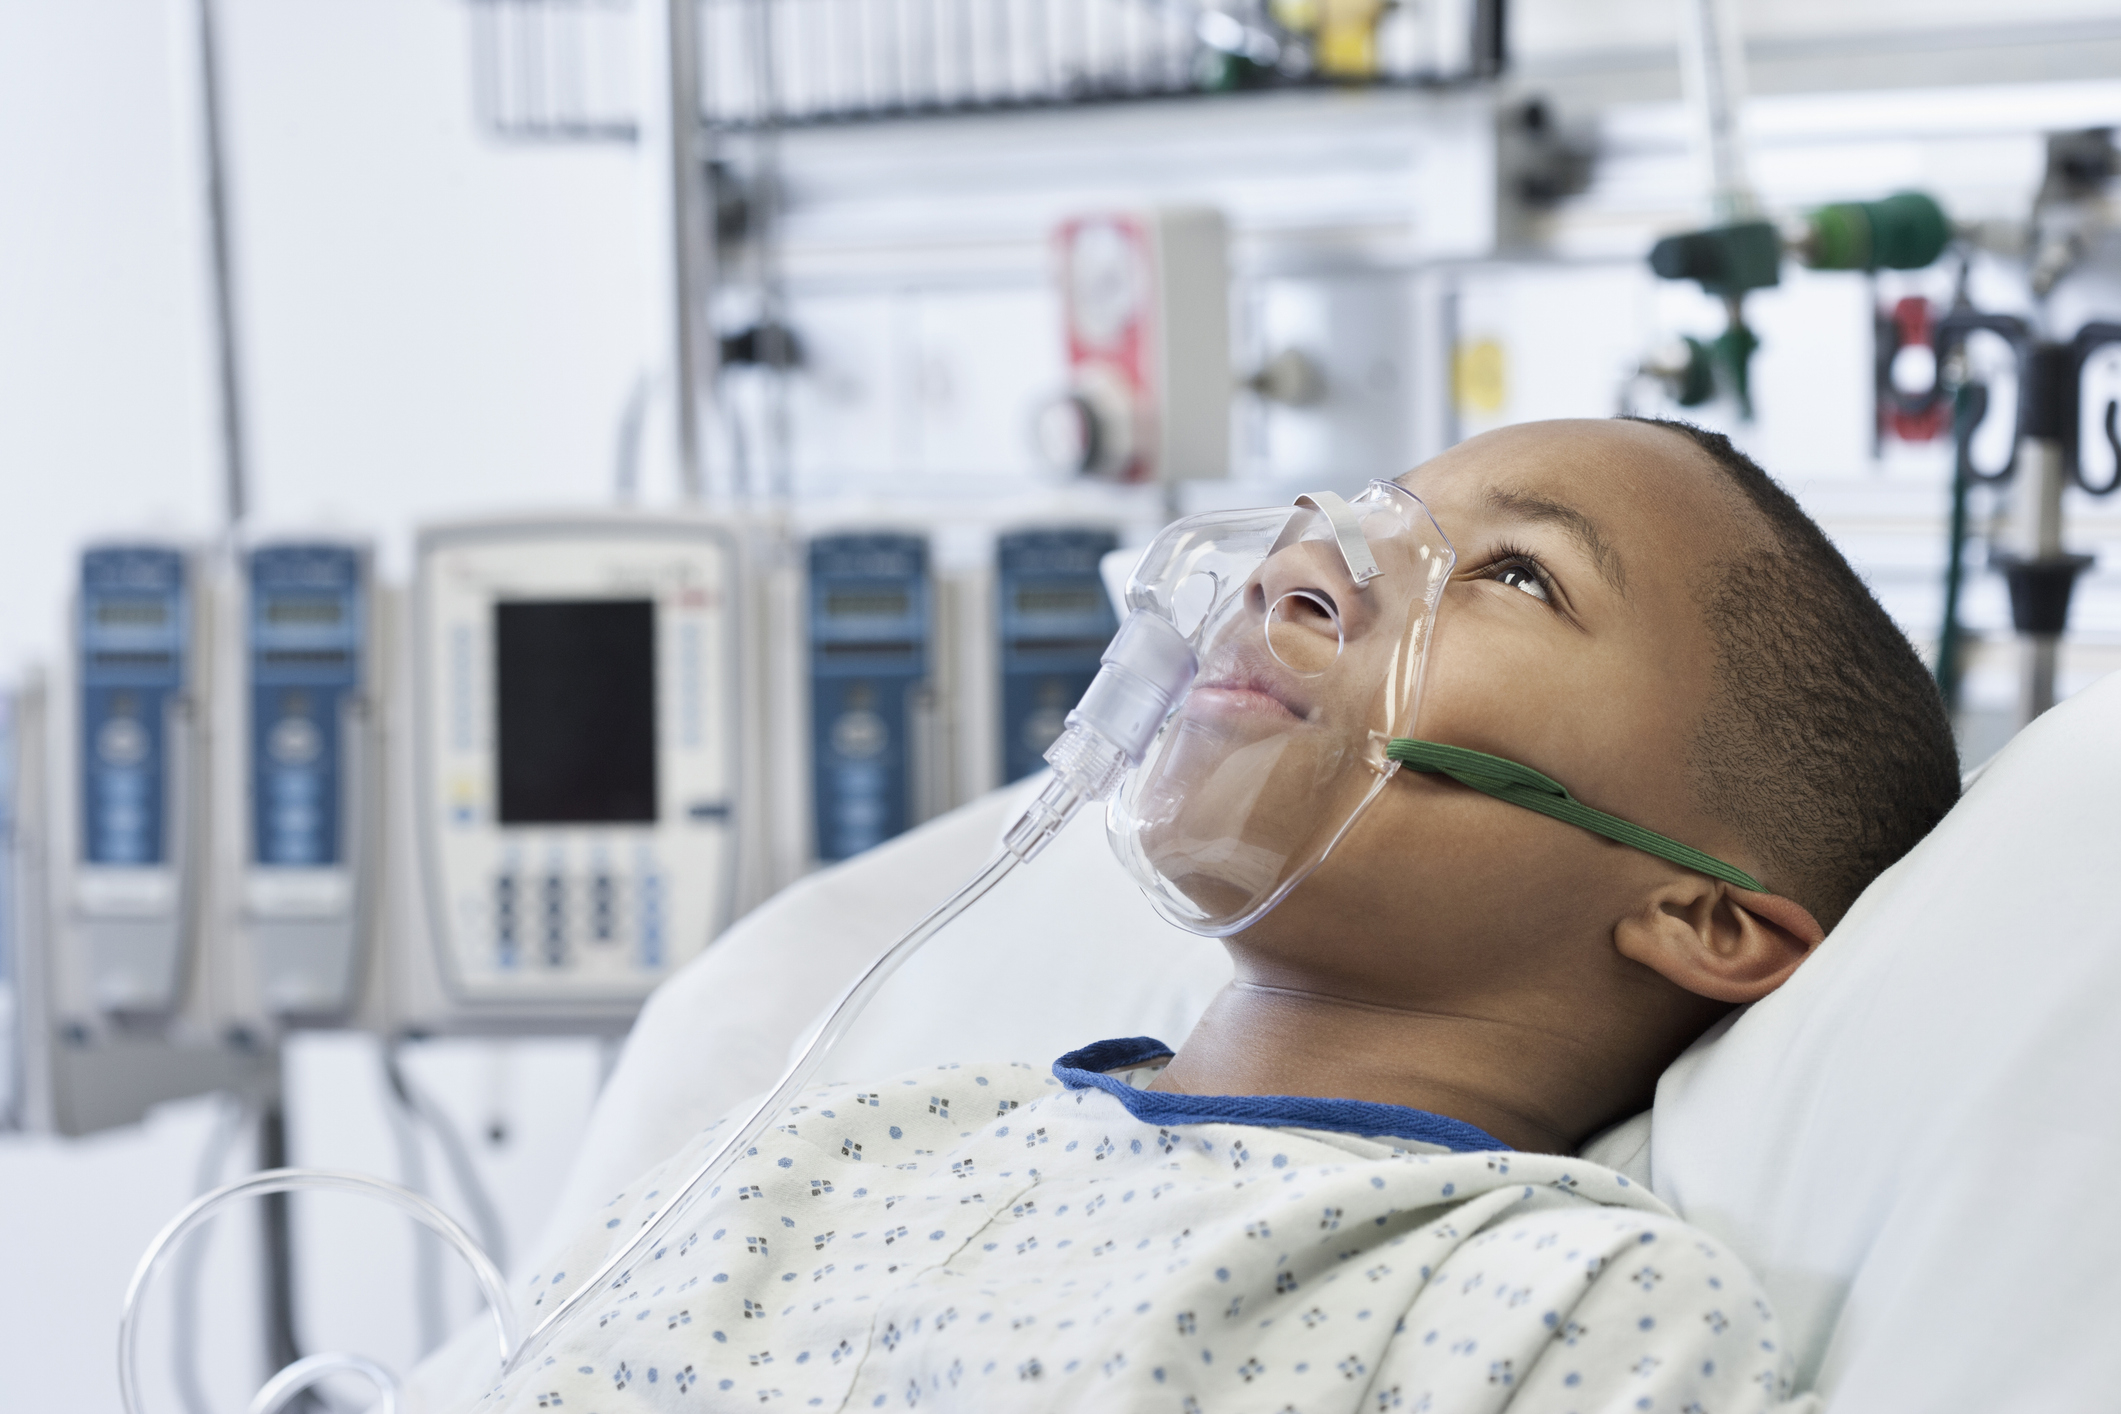 Young boy in hospital bed wearing an oxygen mask with medical equipment in the background